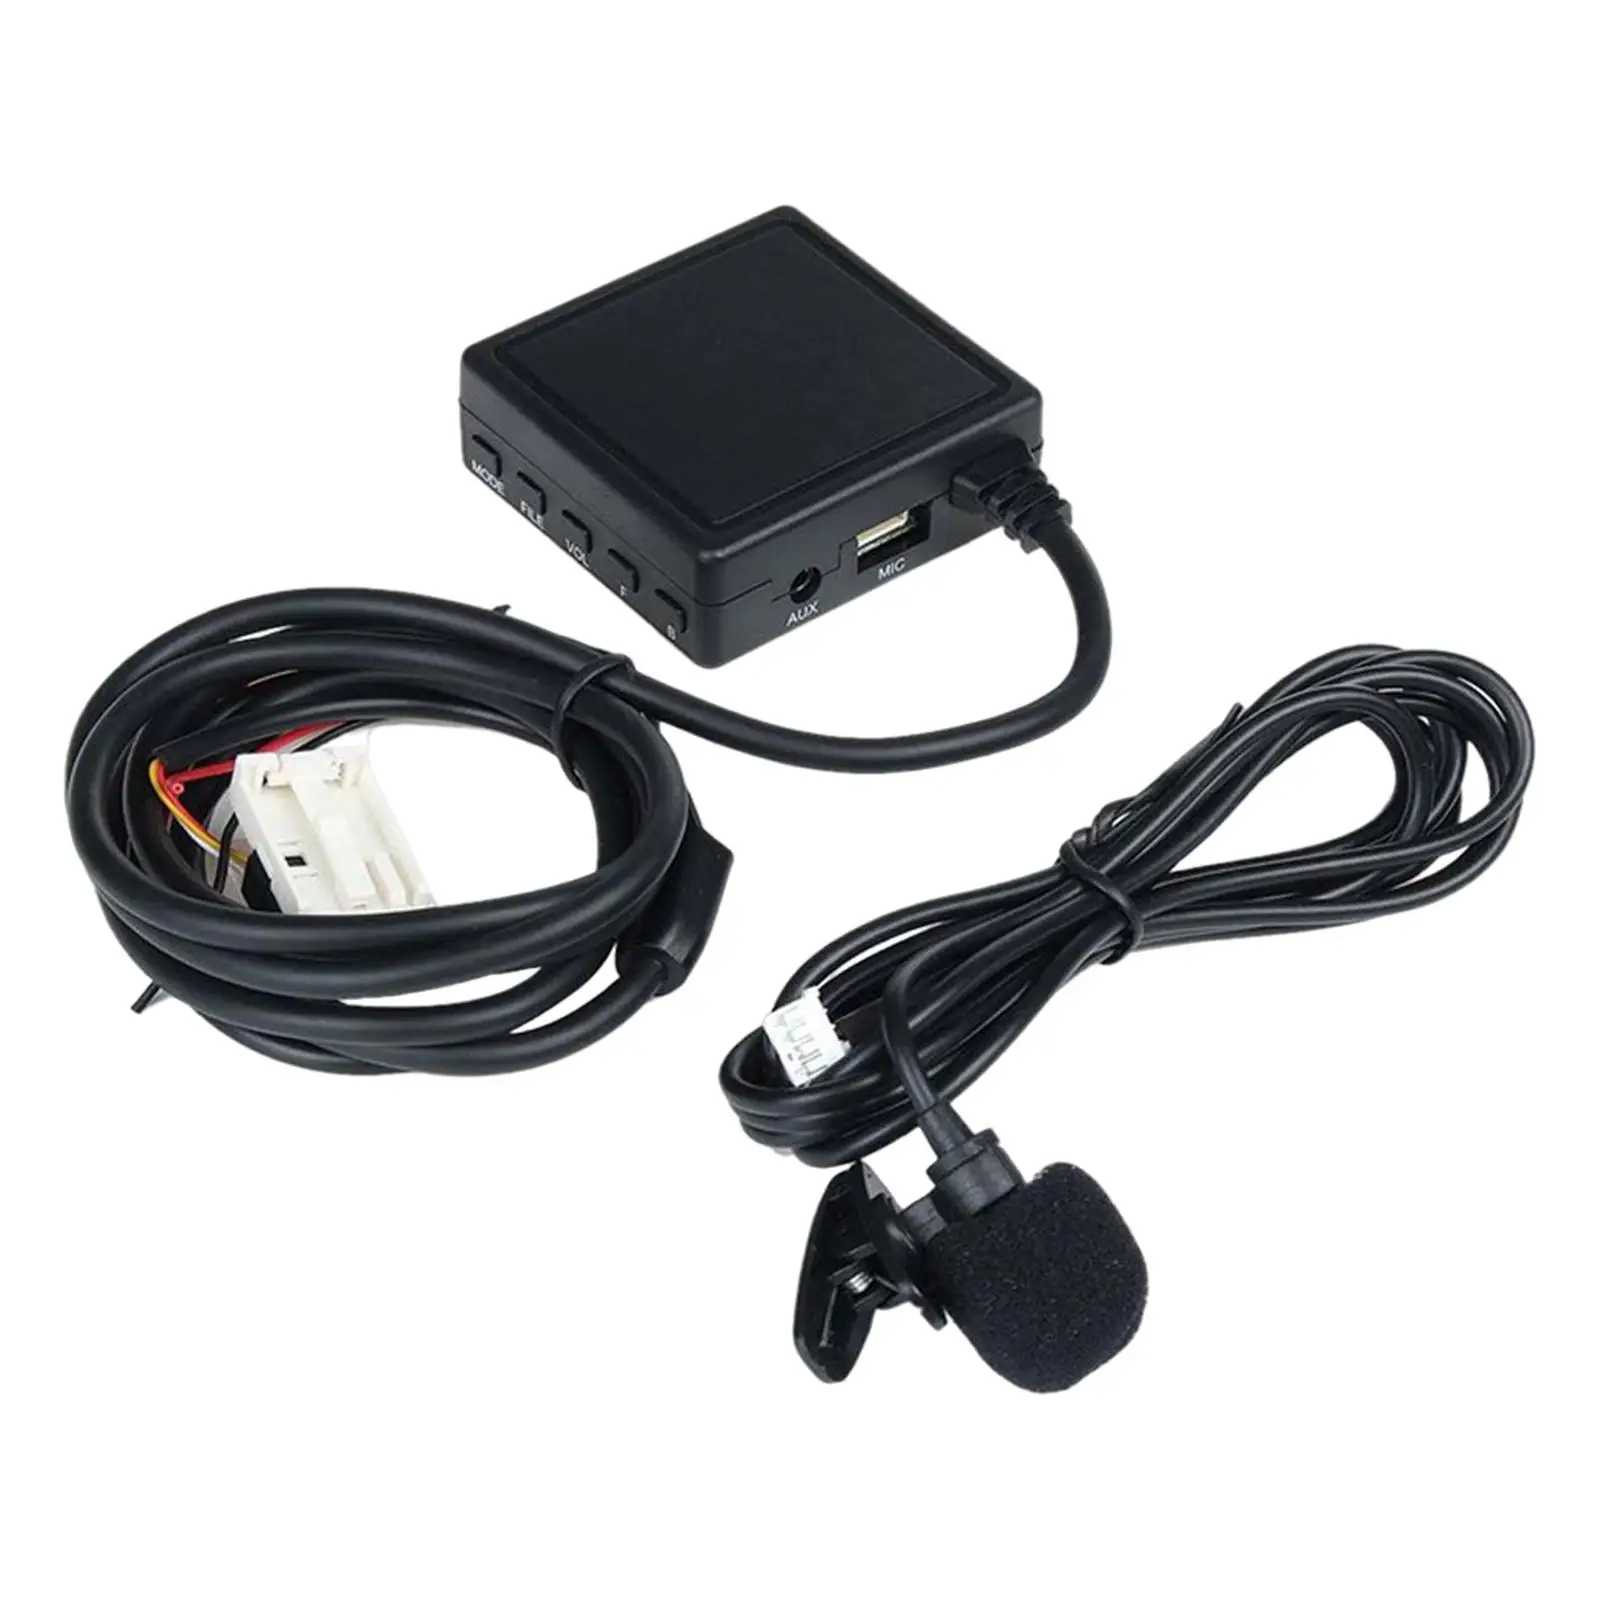 Car AUX Cable Adapter Accessories, Durable Media Interface Module, Support